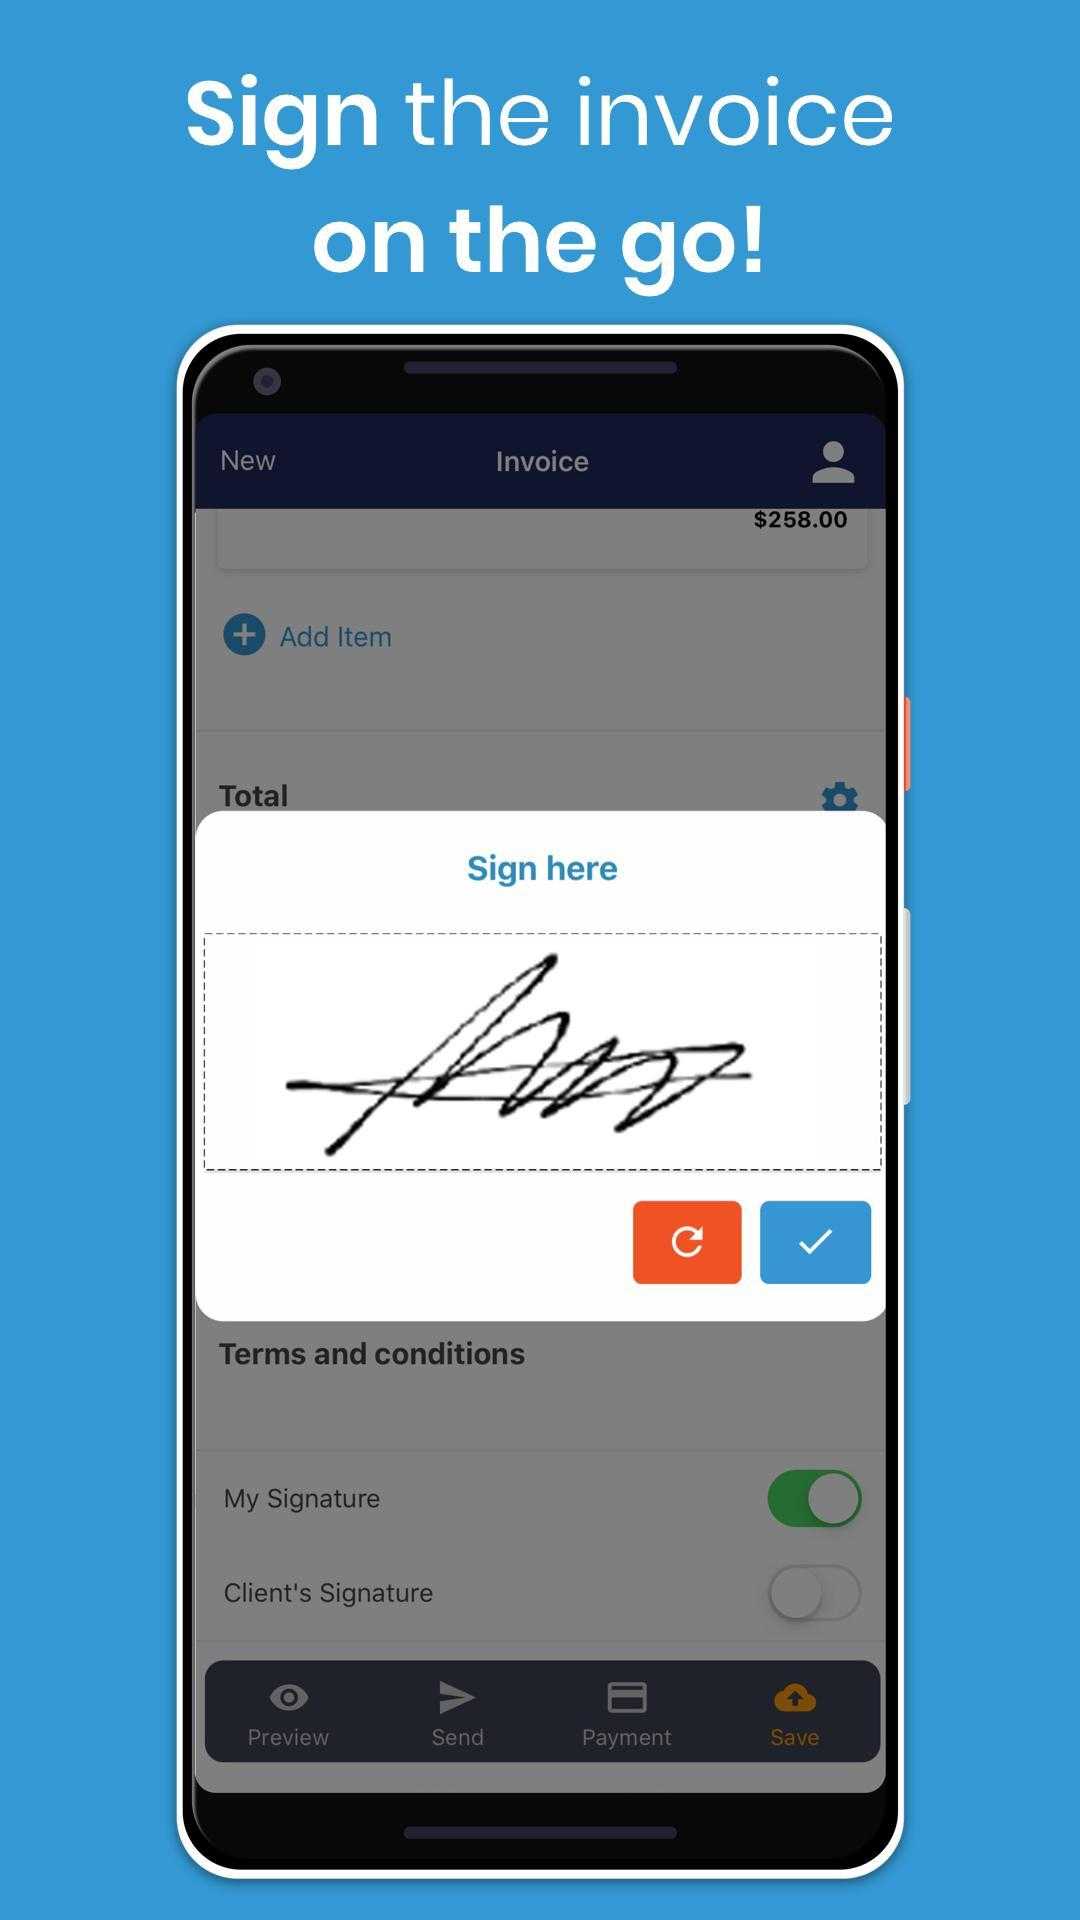 Free Invoice & Estimate Template Generator For Android – Apk Intended For Free Invoice Template For Android